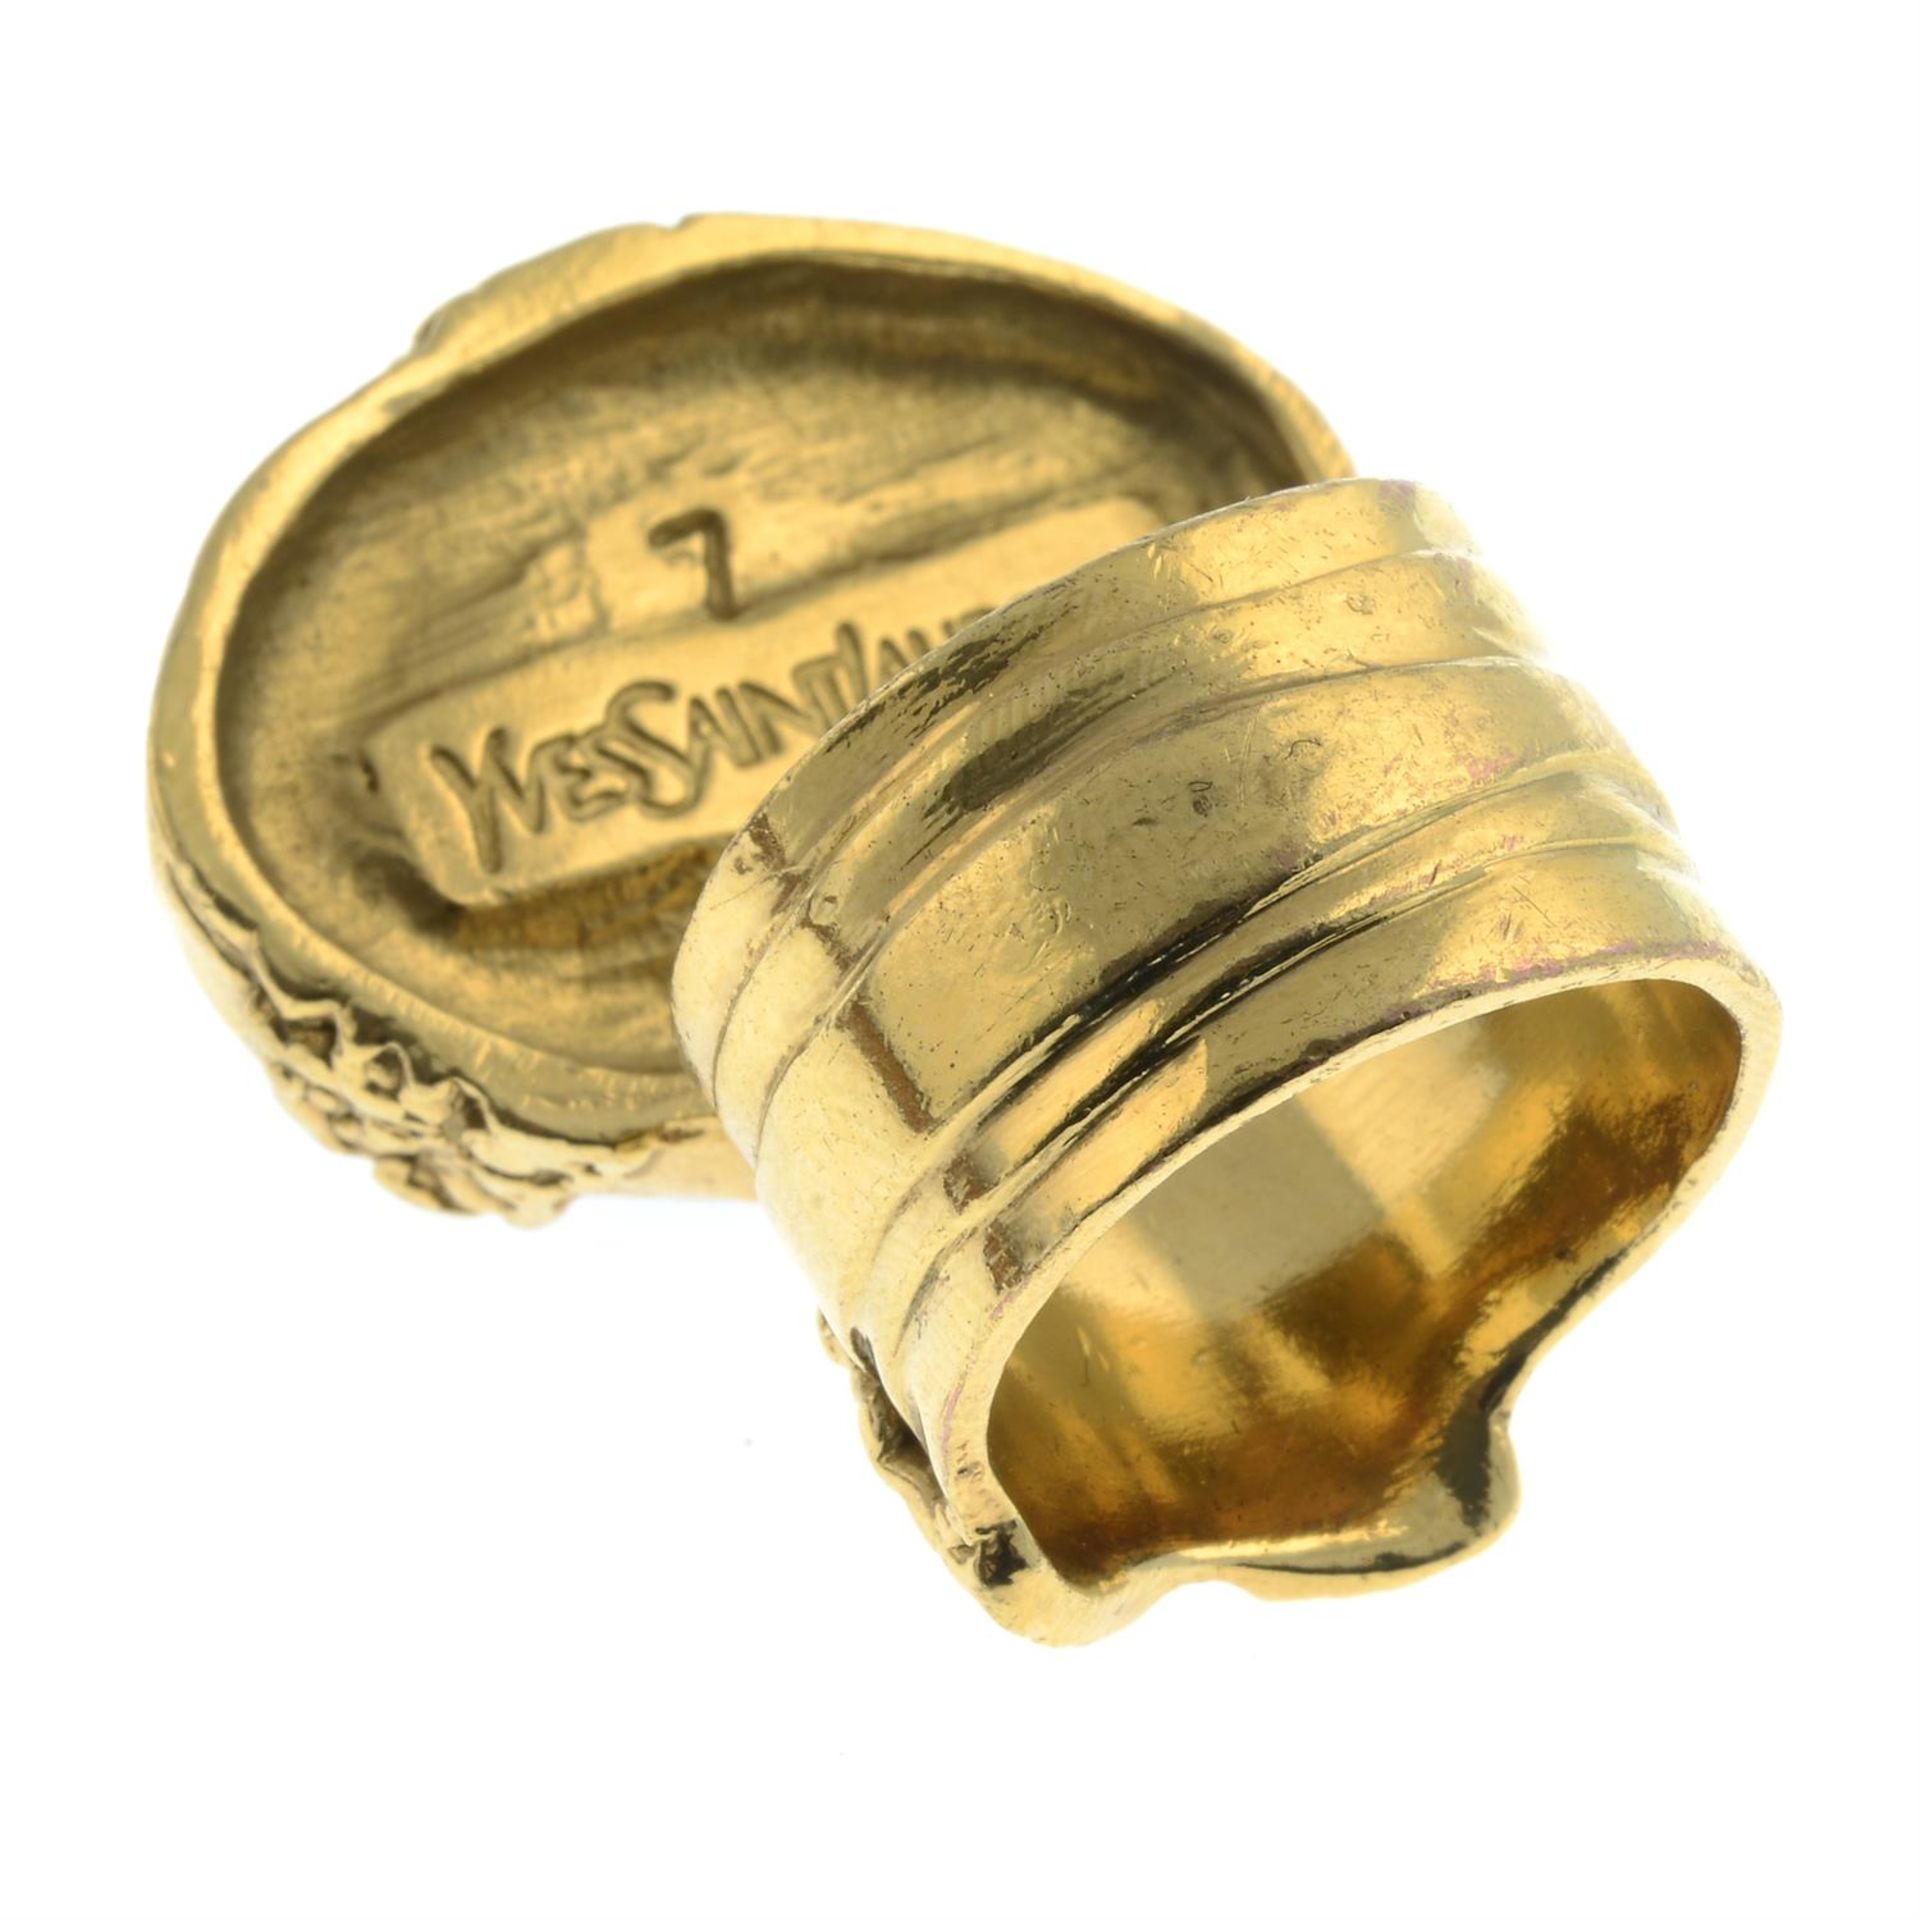 YVES SAINT LAURENT - an Arty ring. - Image 3 of 3